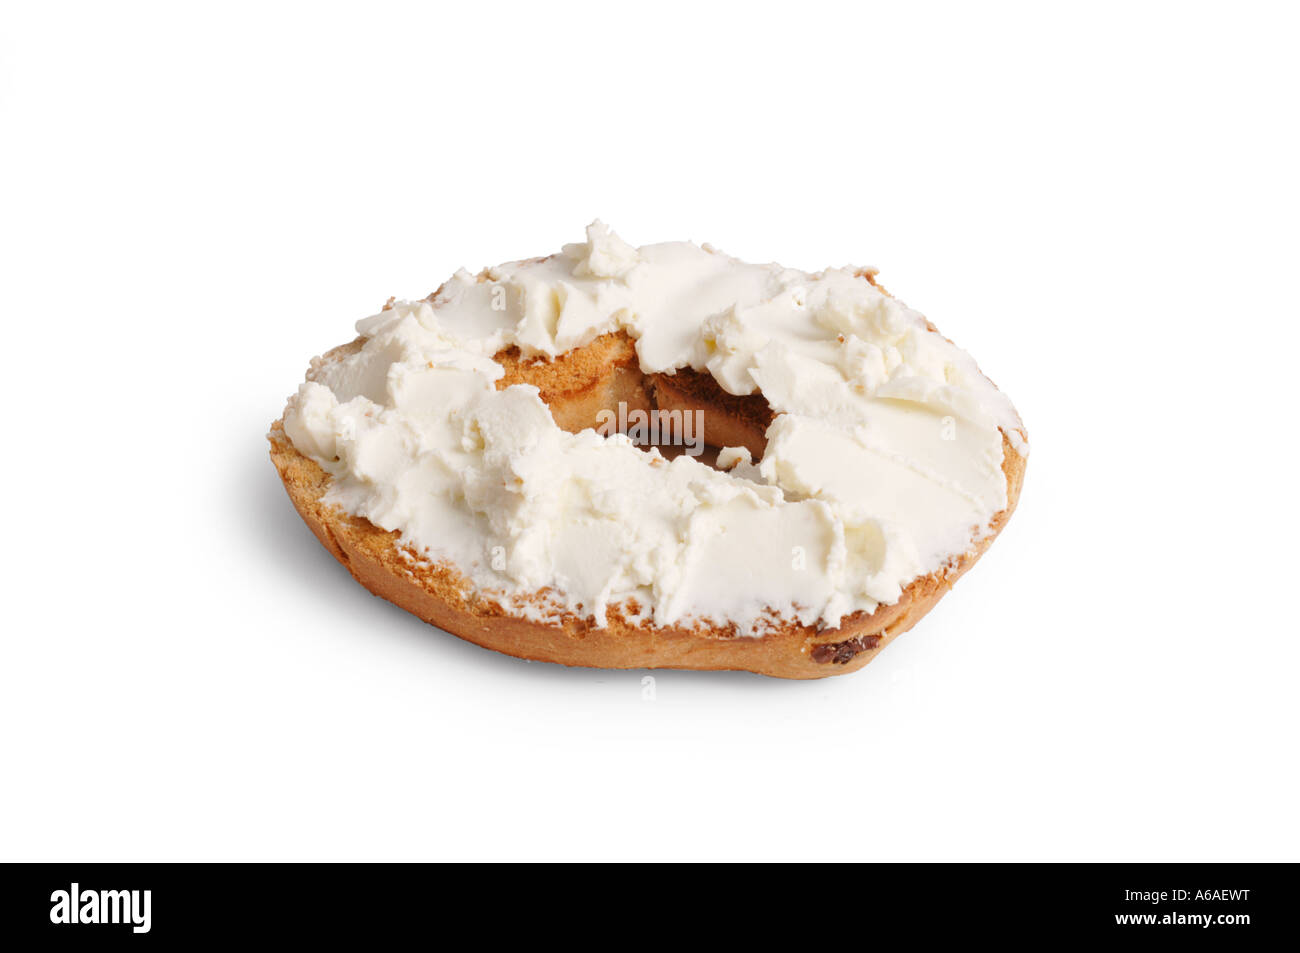 Cinnamon and raisin bagel with cream cheese on white background Stock Photo